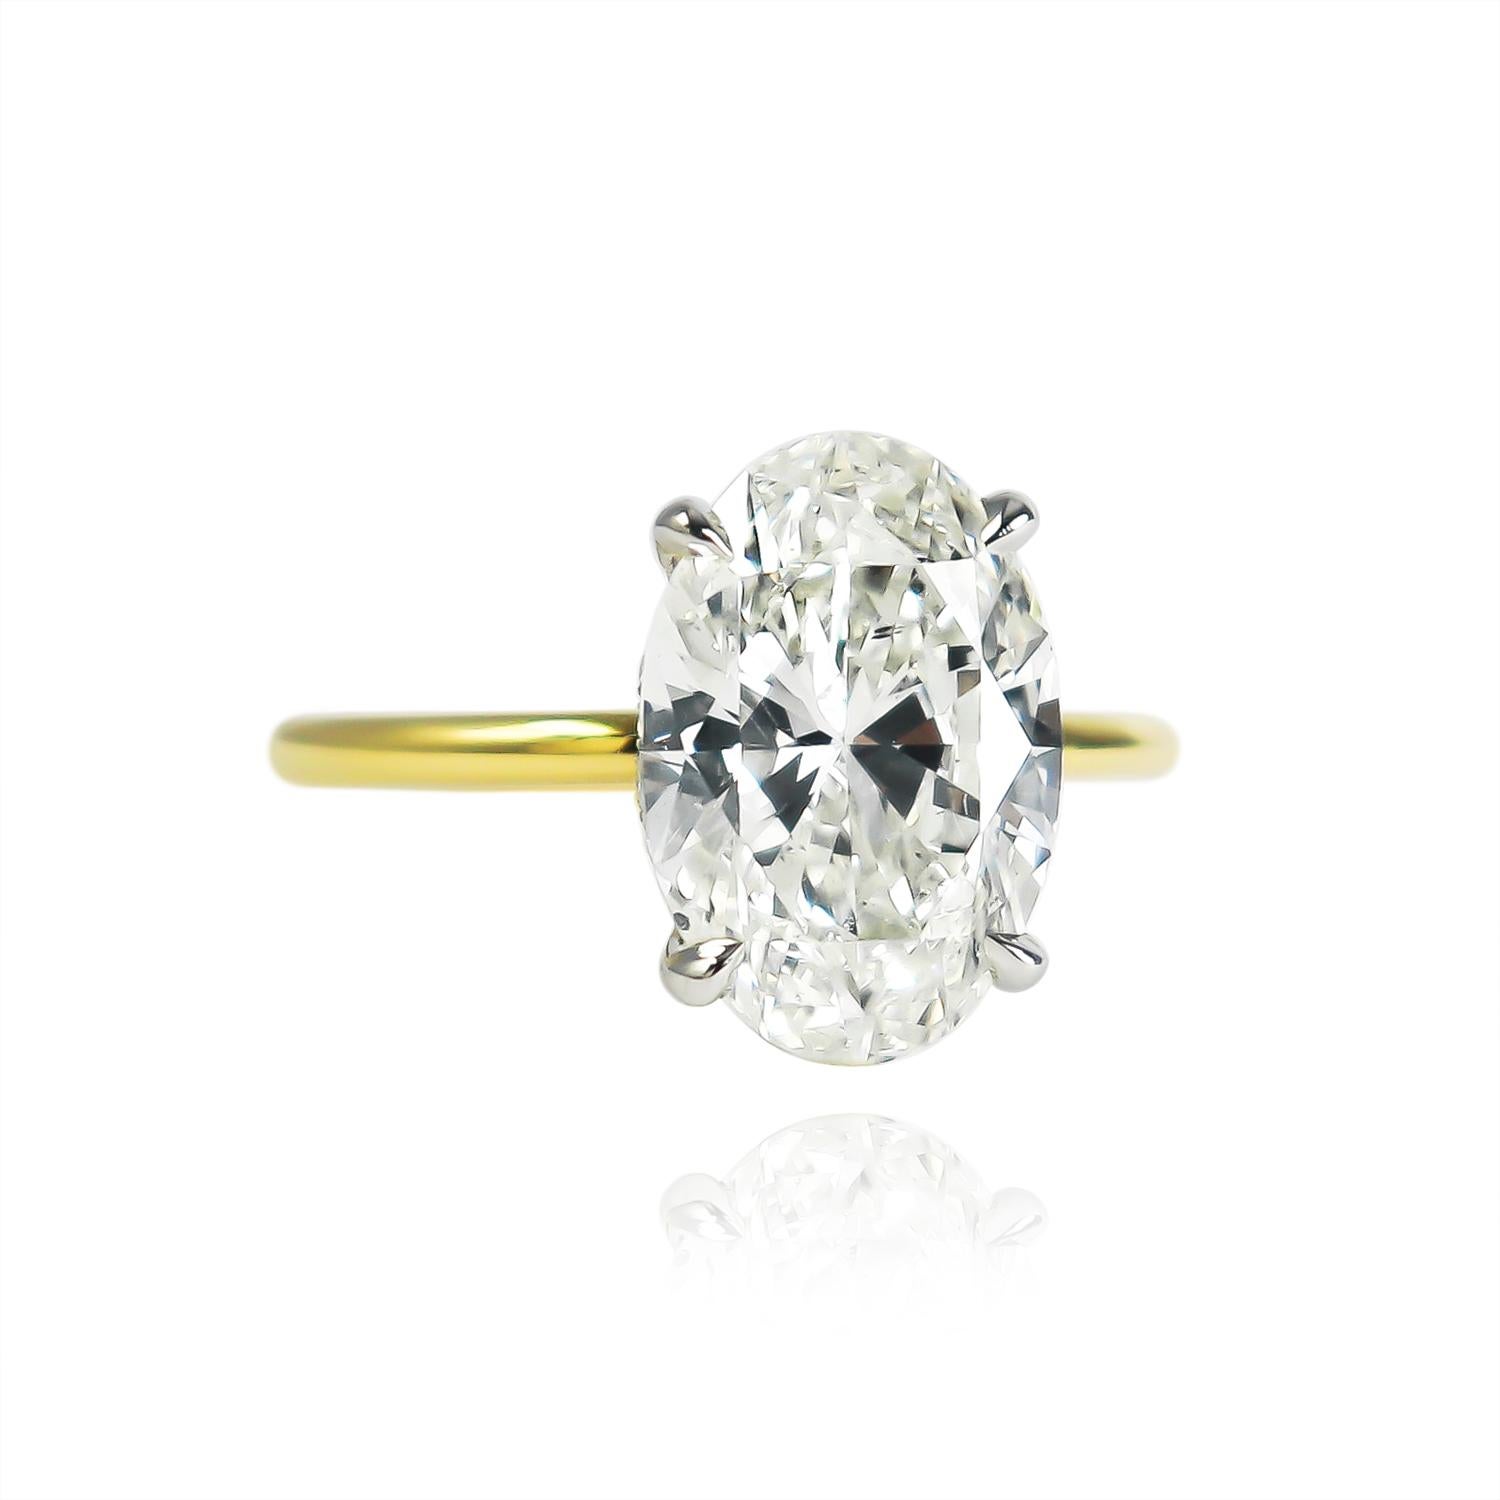 This breathtaking and delicate ring fresh from the J. Birnbach workshop features a GIA certified 3.58 carat oval brilliant cut diamond of J color and SI1 clarity. Set in a handmade, 18K yellow gold and platinum solitaire ring with a hidden halo